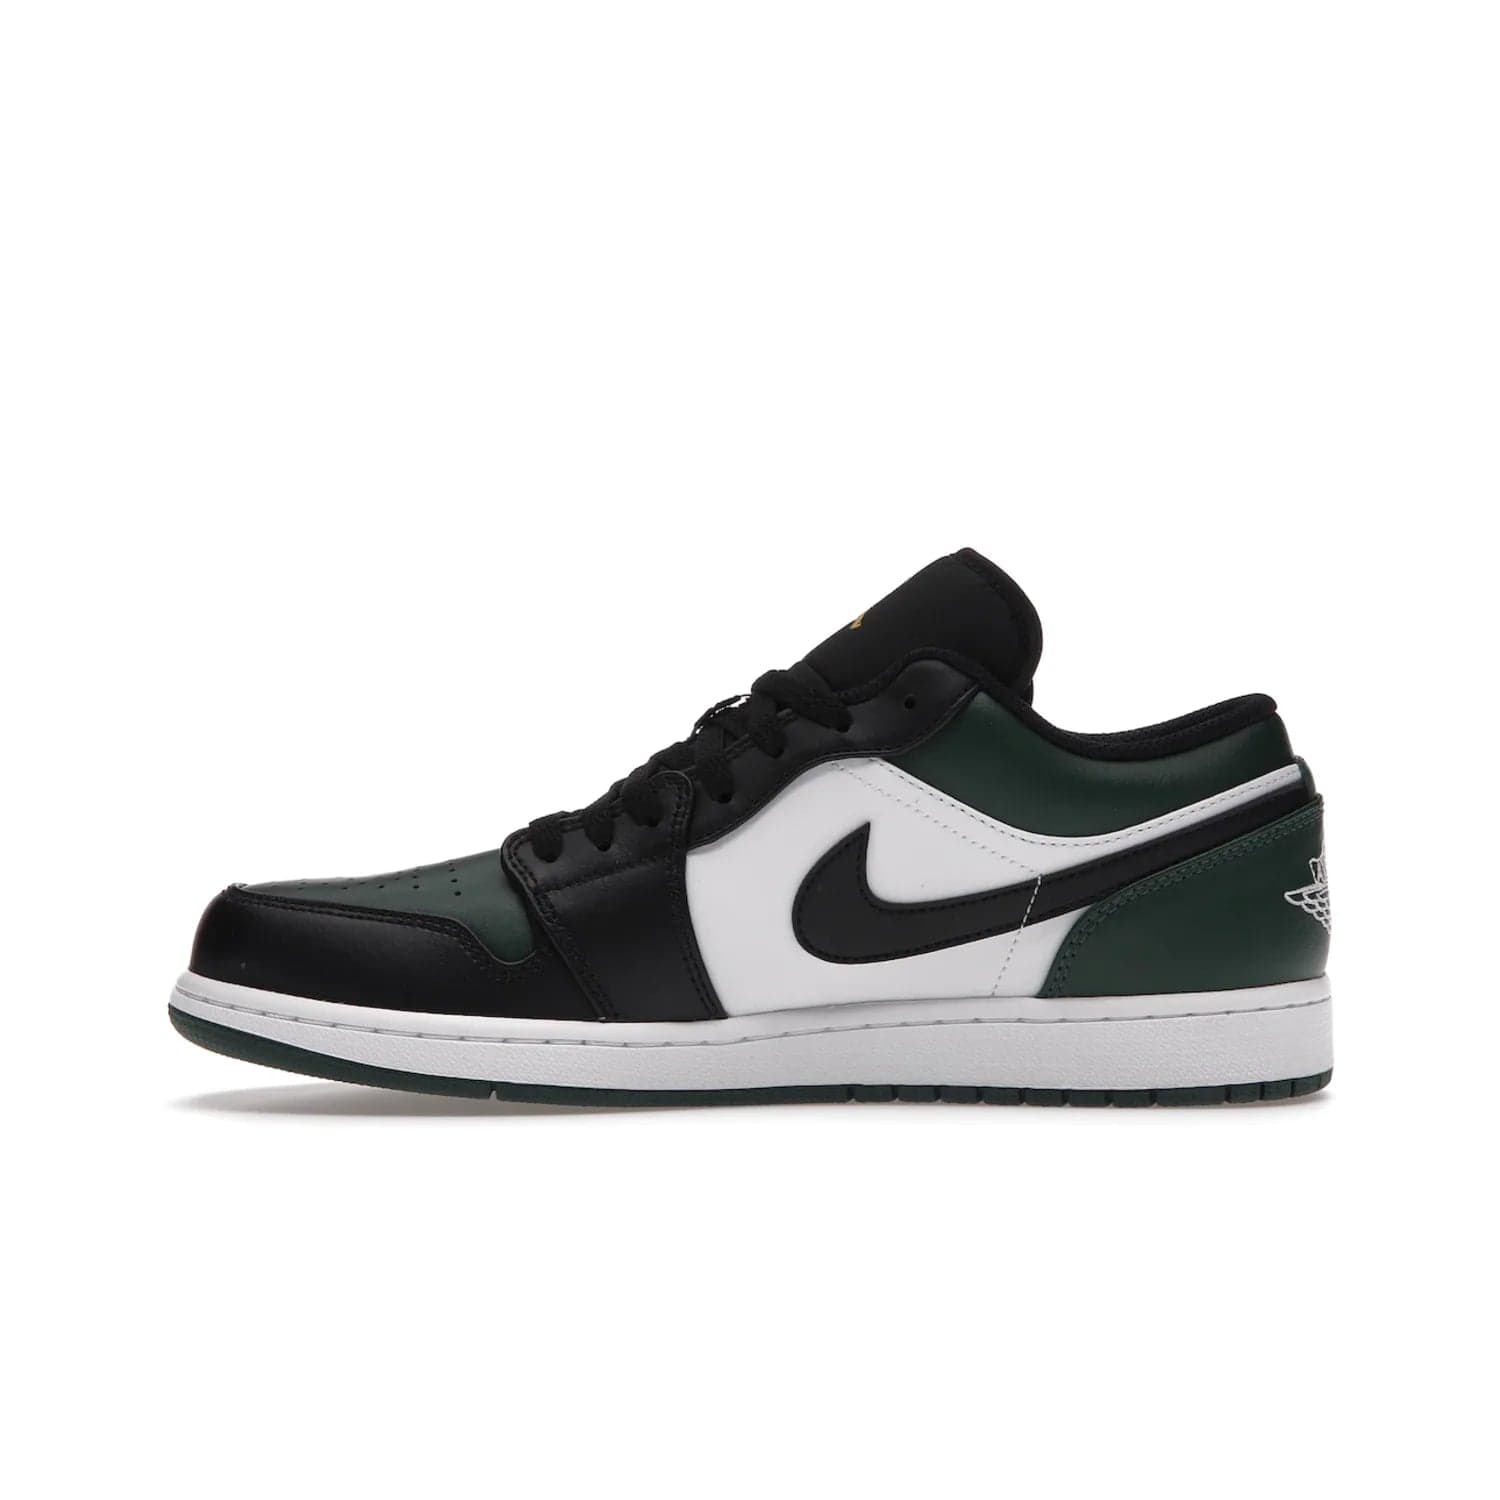 Jordan 1 Low Green Toe - Image 19 - Only at www.BallersClubKickz.com - The Jordan 1 Low Green Toe features white, black and Noble Green leather with black Swoosh. Get the classic Bred Toe-inspired color blocking with green perforated toe box. White and green Air sole completes the design. Released in October 2021 at only $100. Grab your pair now!